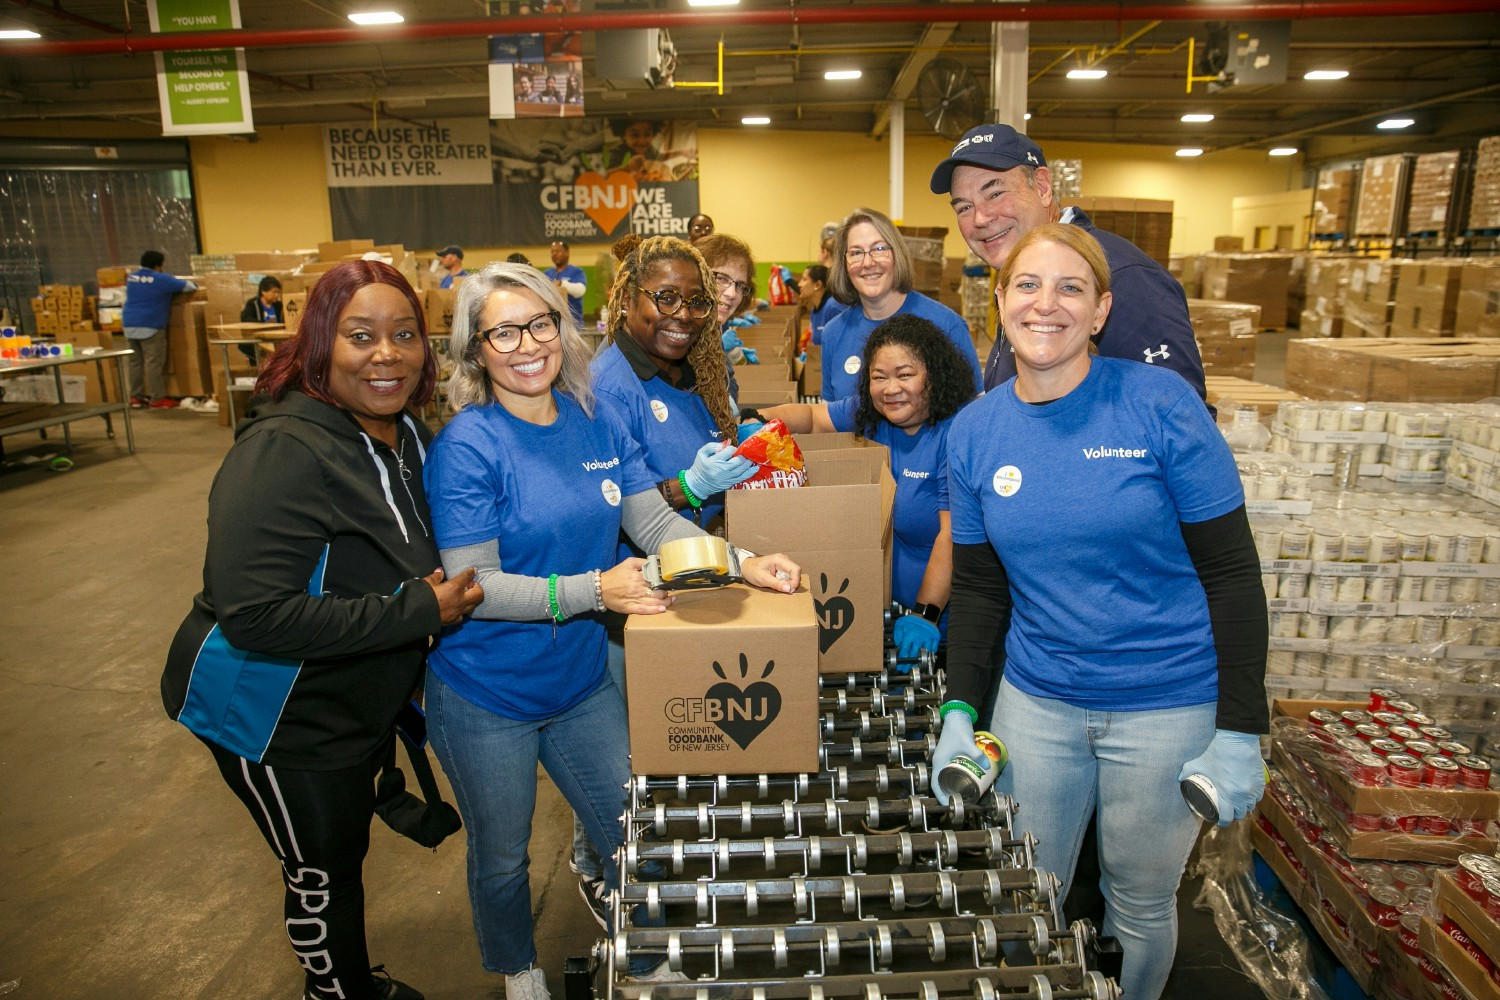 Horizon volunteers lend a hand at the Community FoodBank of New Jersey during September’s National Hunger Action Month.